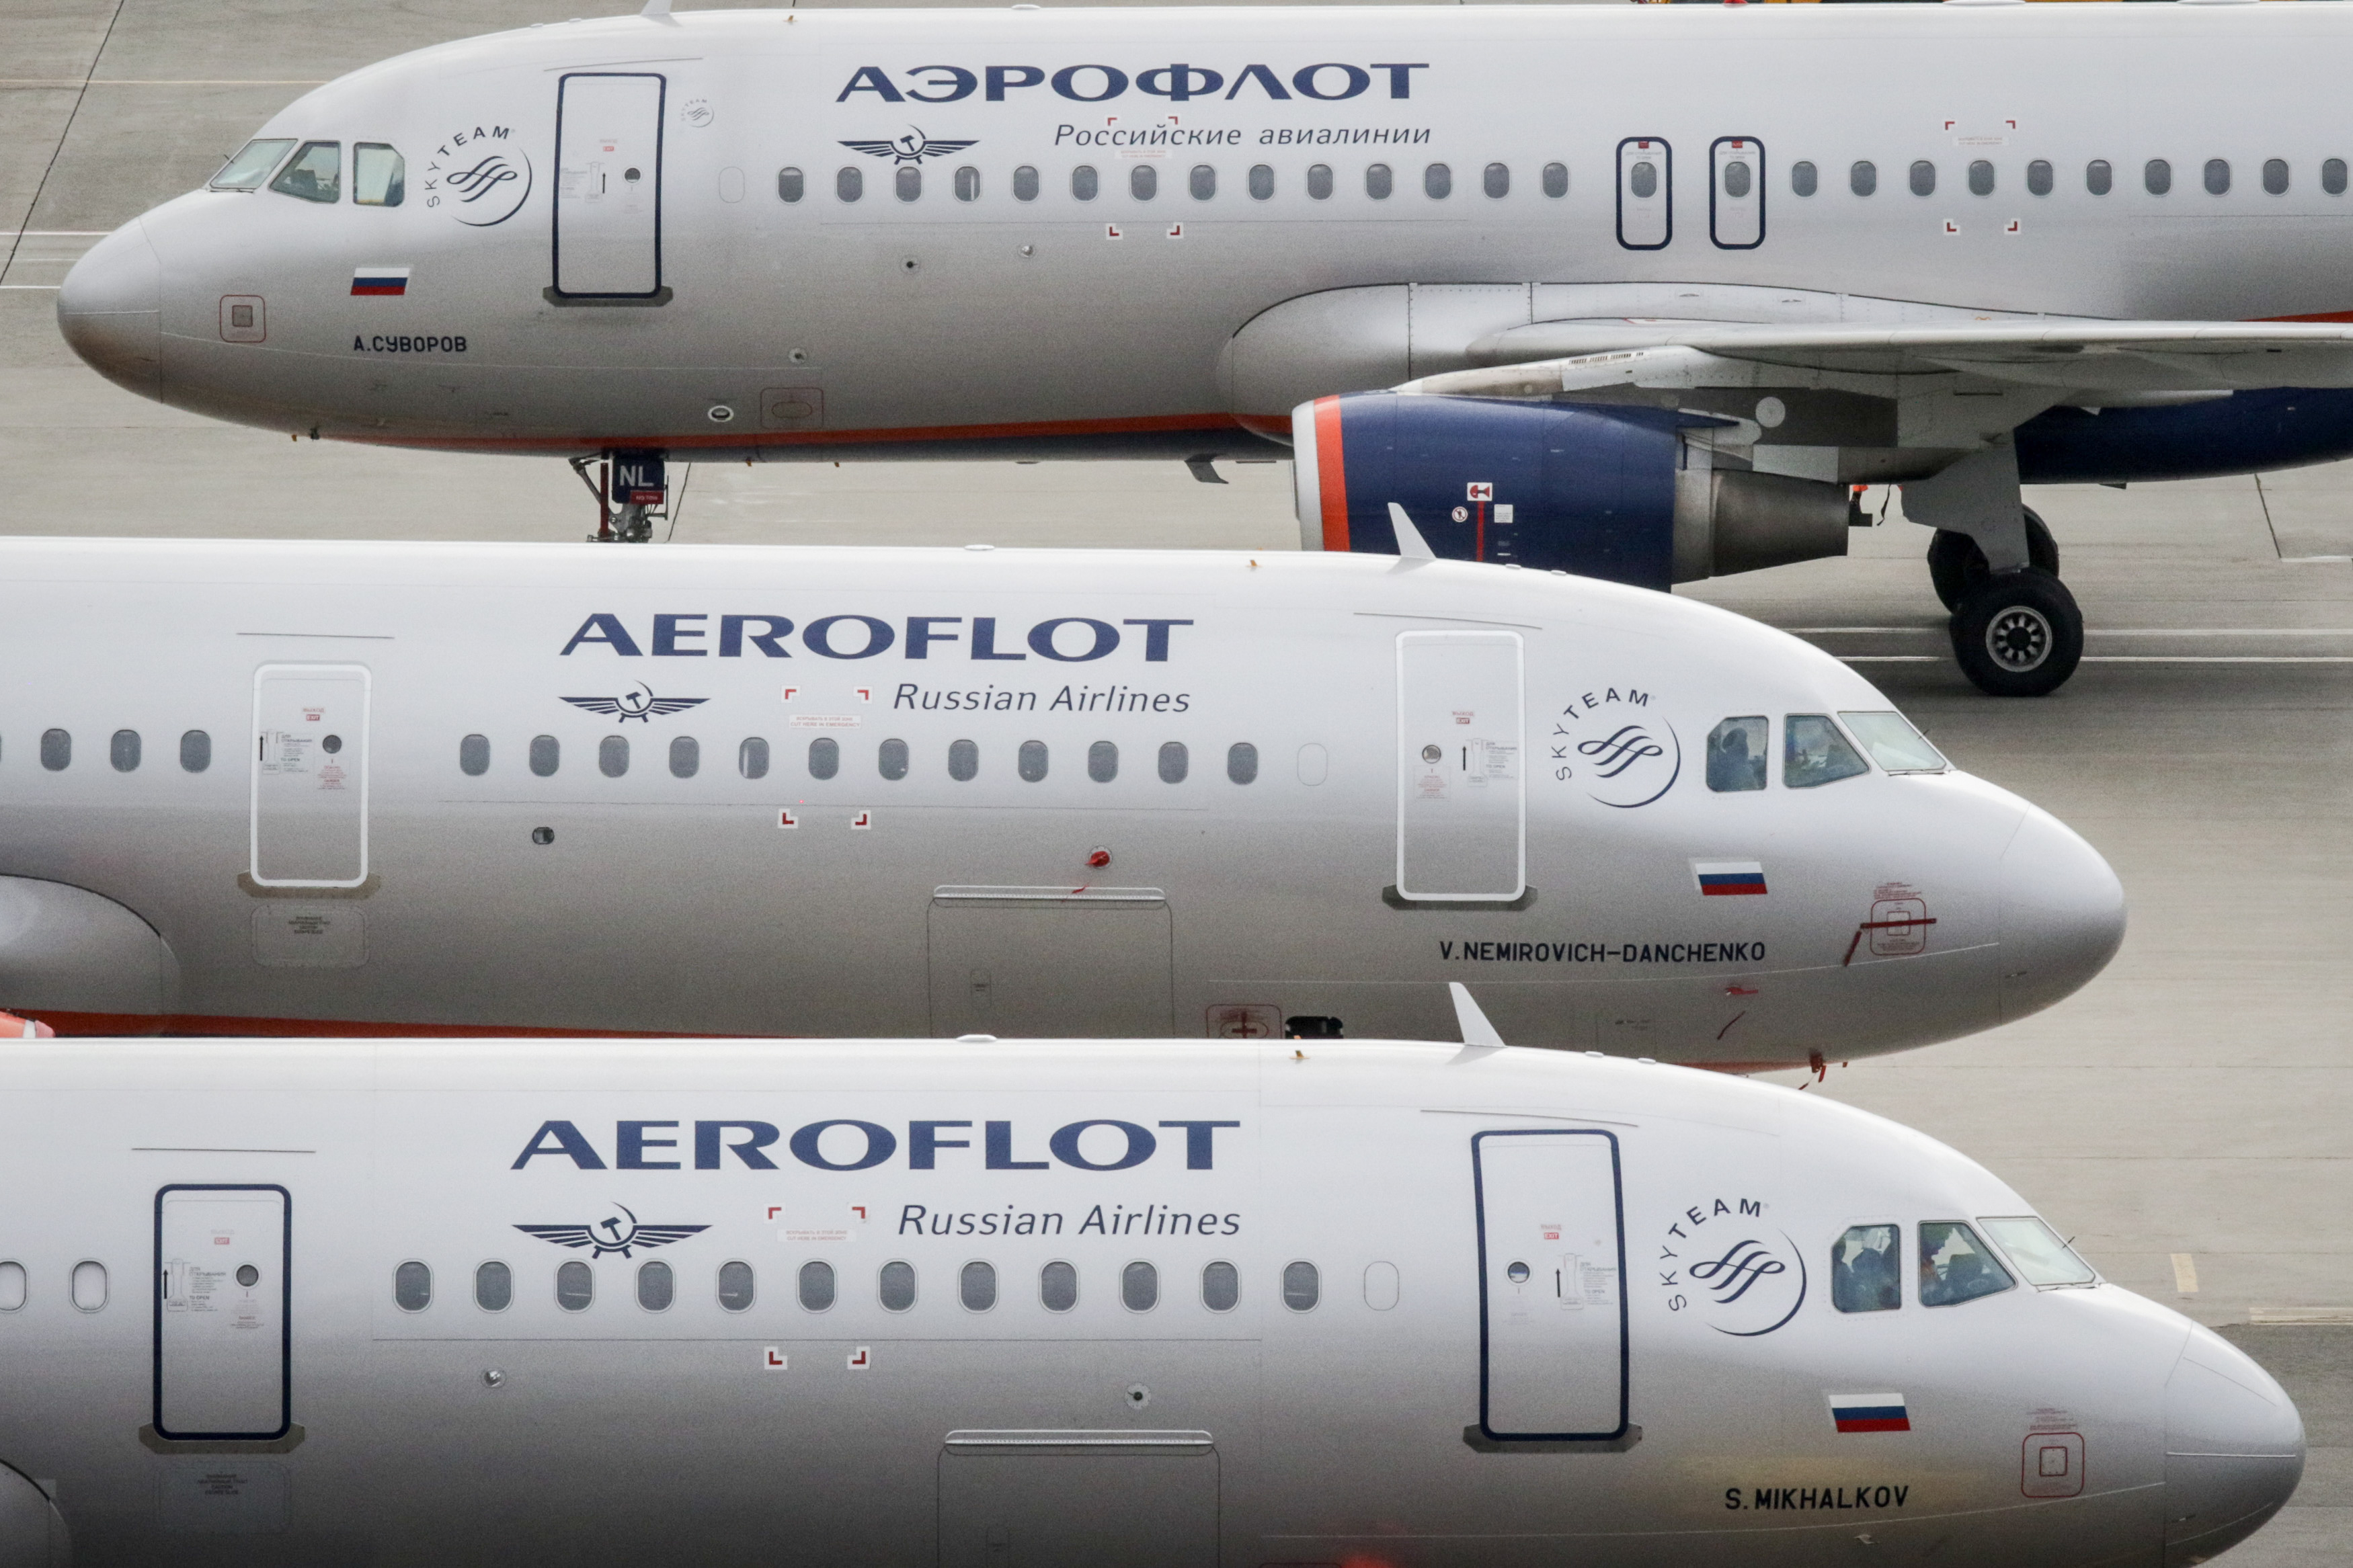 MOSCOW, RUSSIA - 2021/09/16: Aeroflot Russian Airlines Airbus A320 civil jet aircrafts at Moscow-Sheremetyevo International Airport in Moscow, Russia, on September 19, 2021.